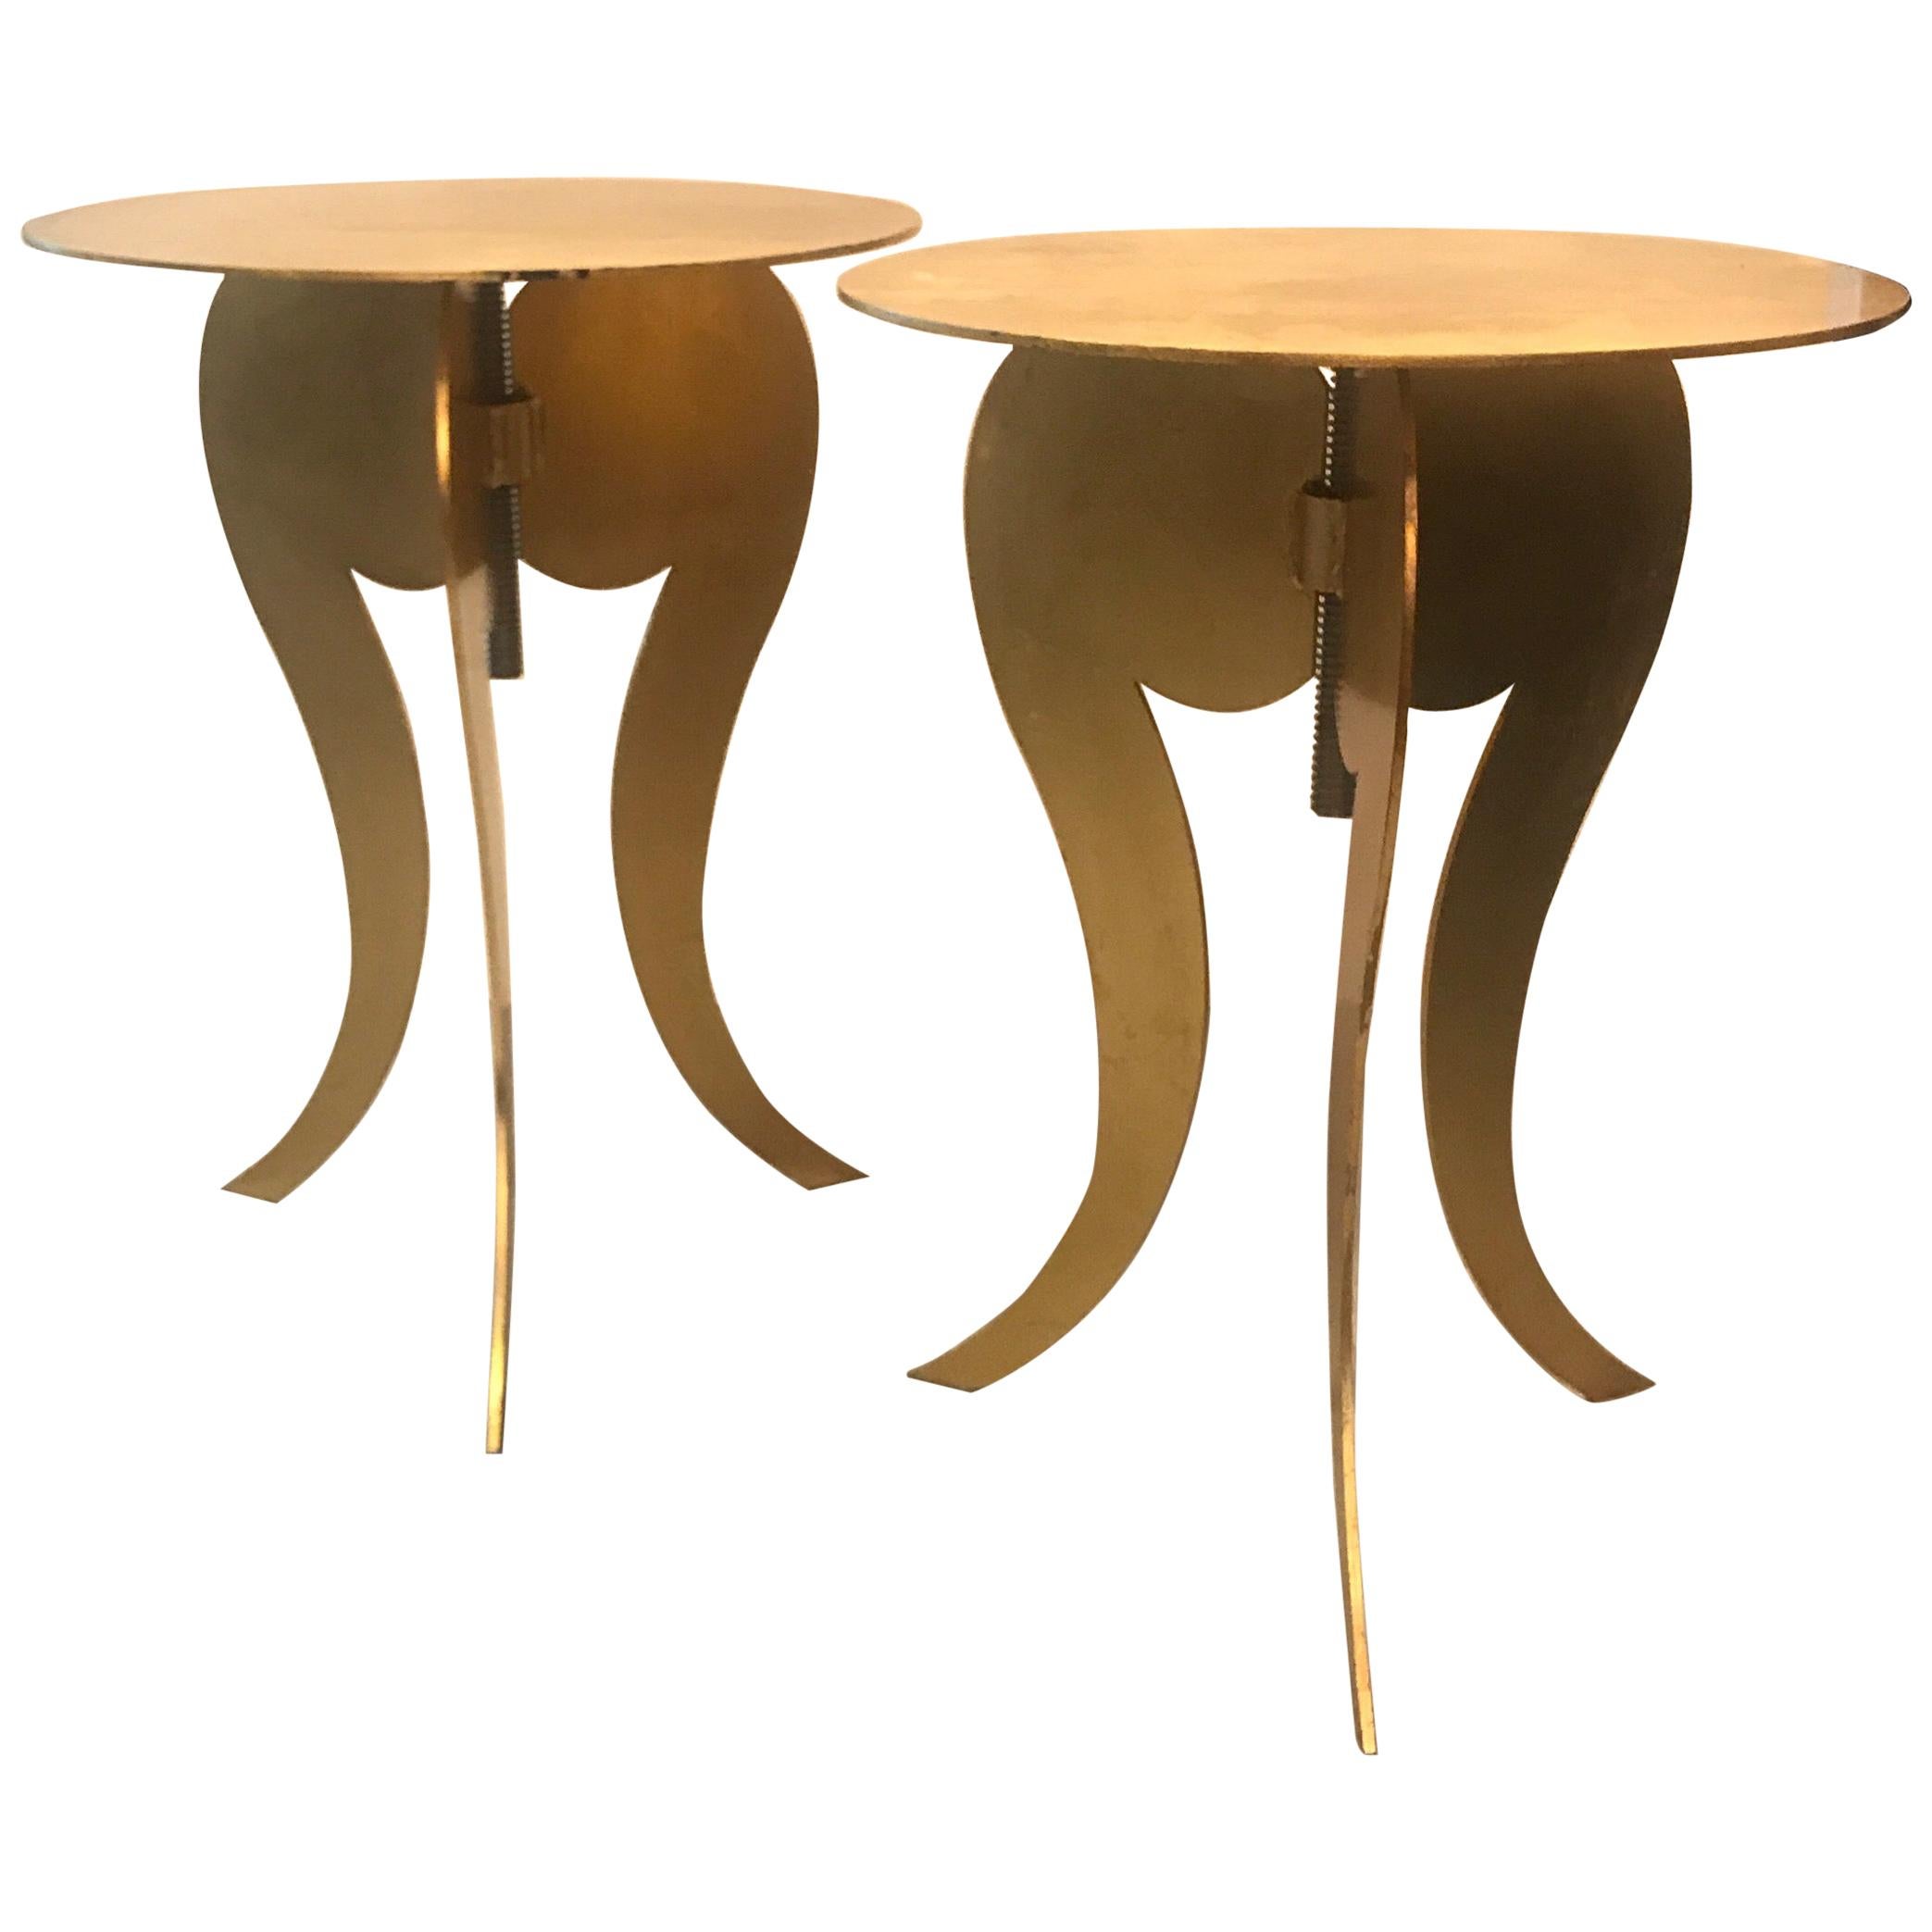 Pair of Gilt Steel Adjustable Round Pedestal Tables attributed to Sergio Terzani